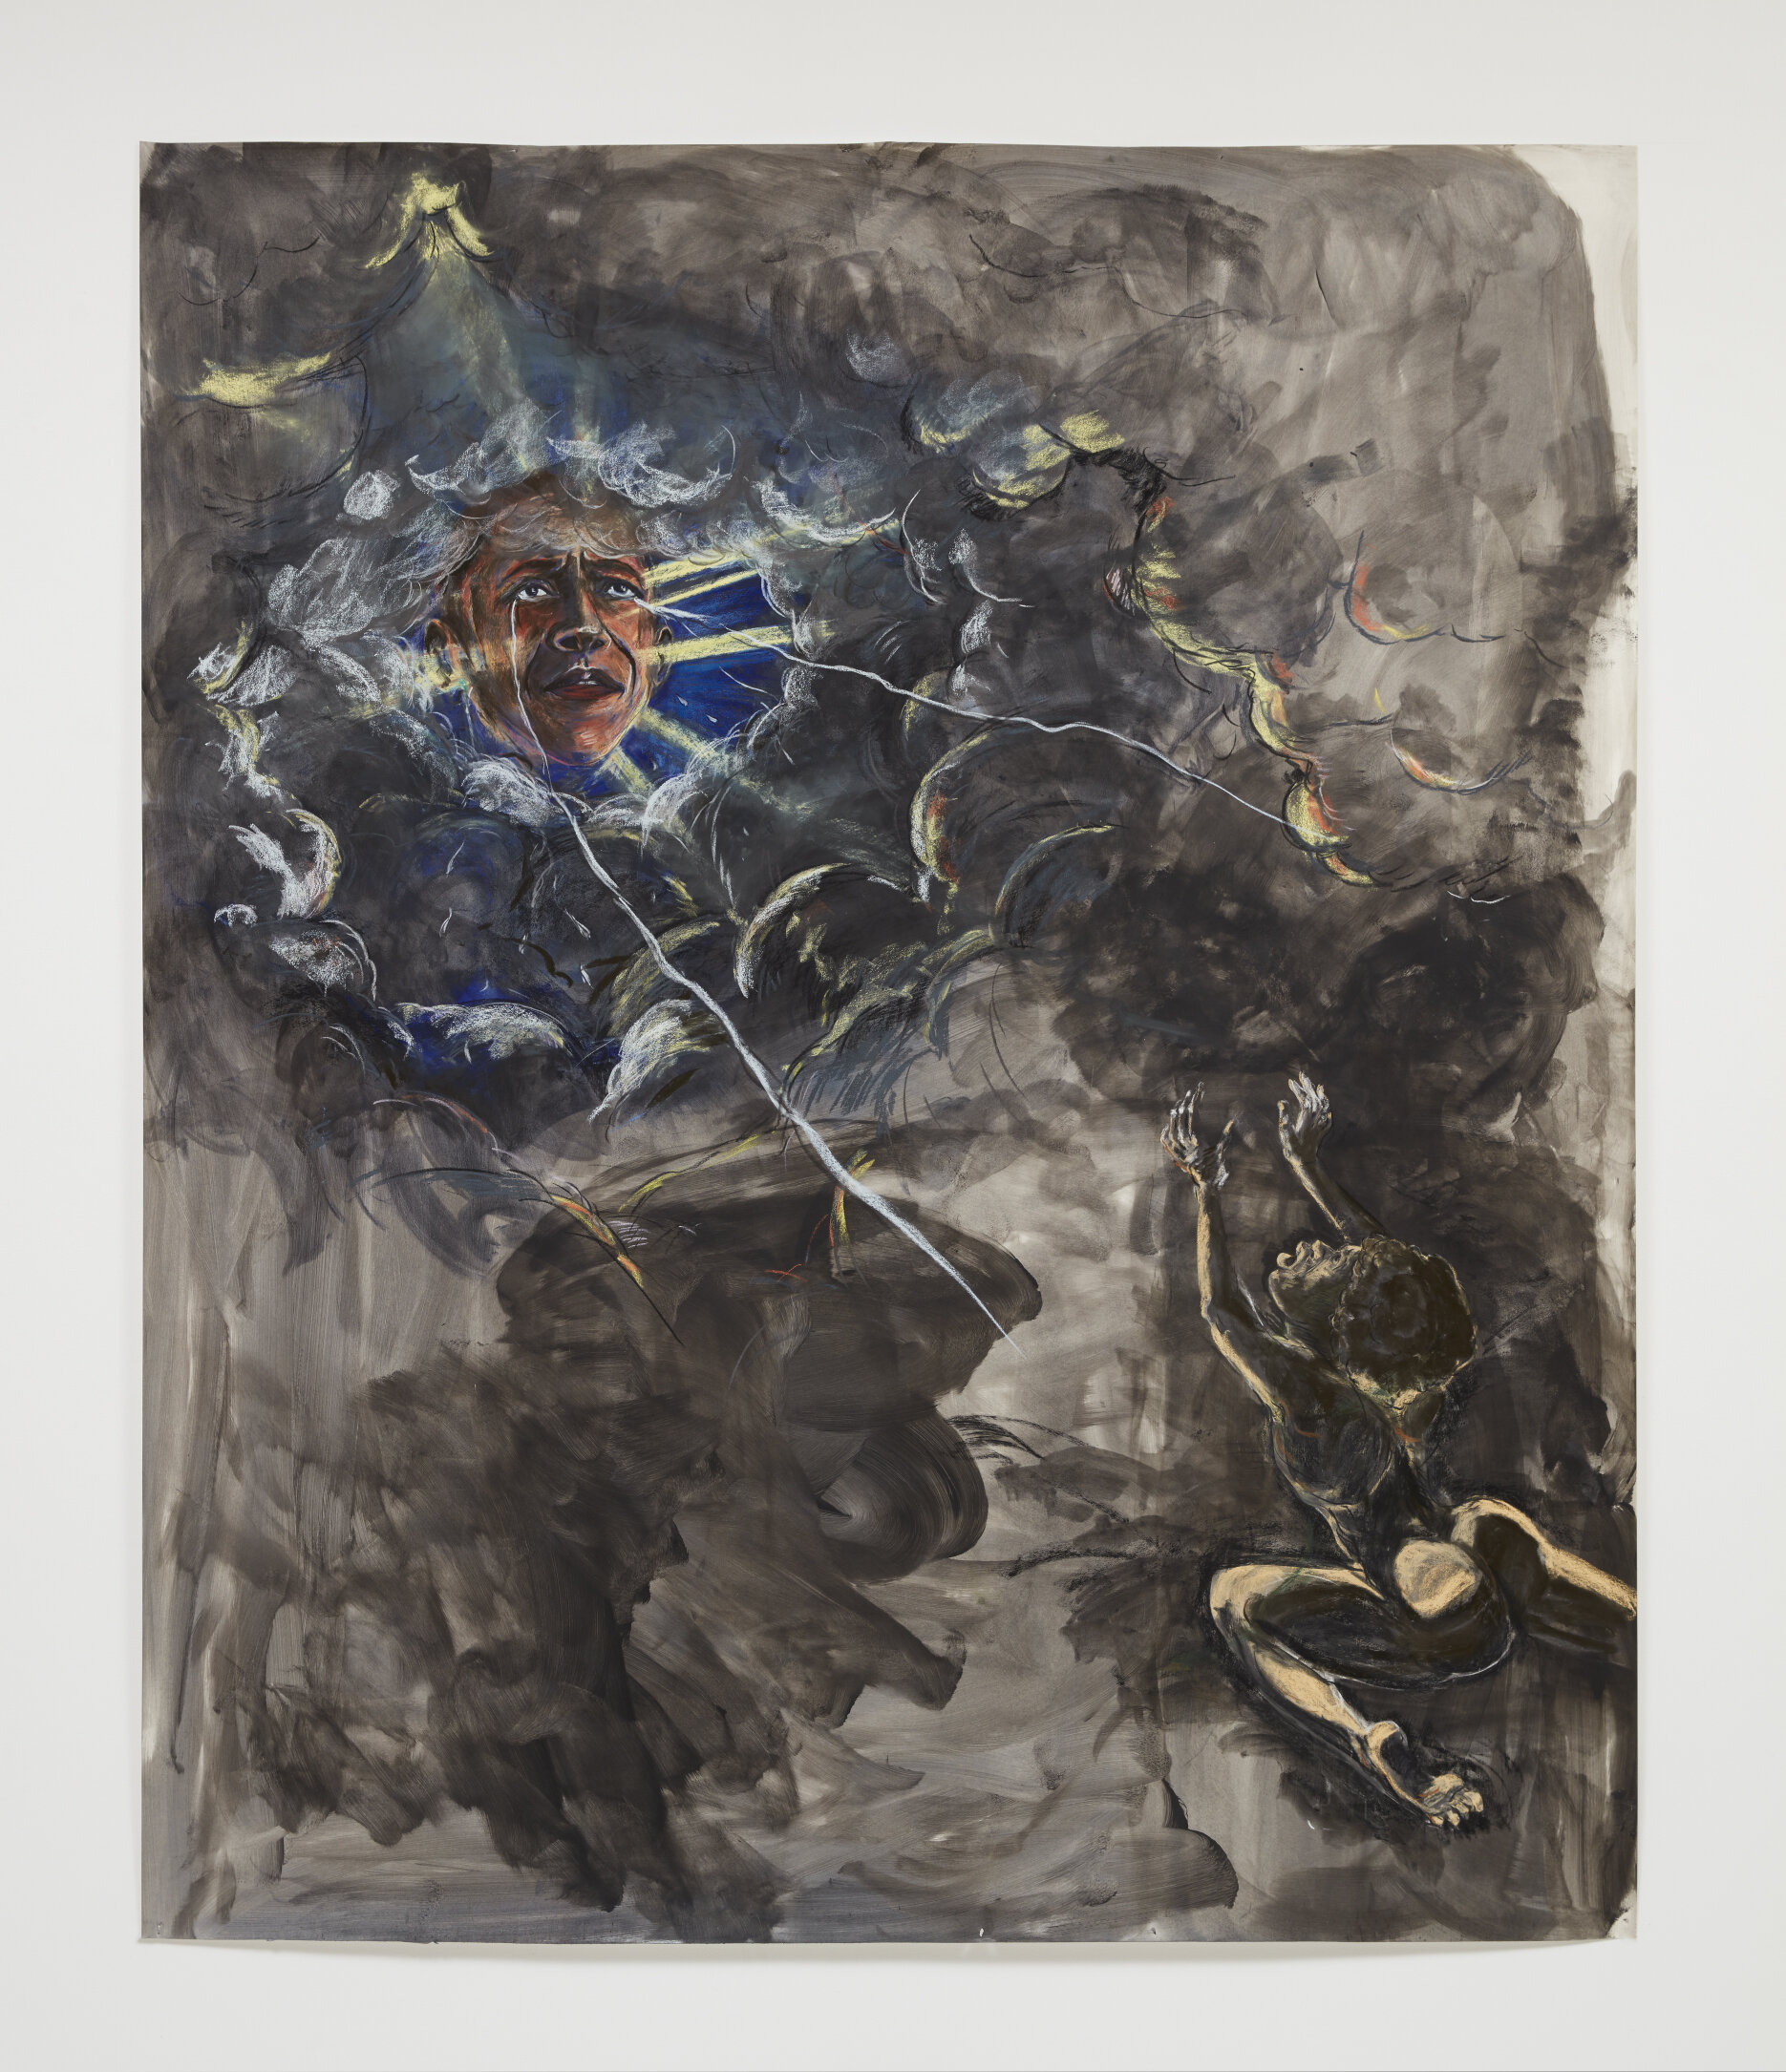   Allegory of the Obama Years by Kara E. Walker,  2019. Pastel, Conté crayon, charcoal on treated paper. 87.375 x 72 inches. 